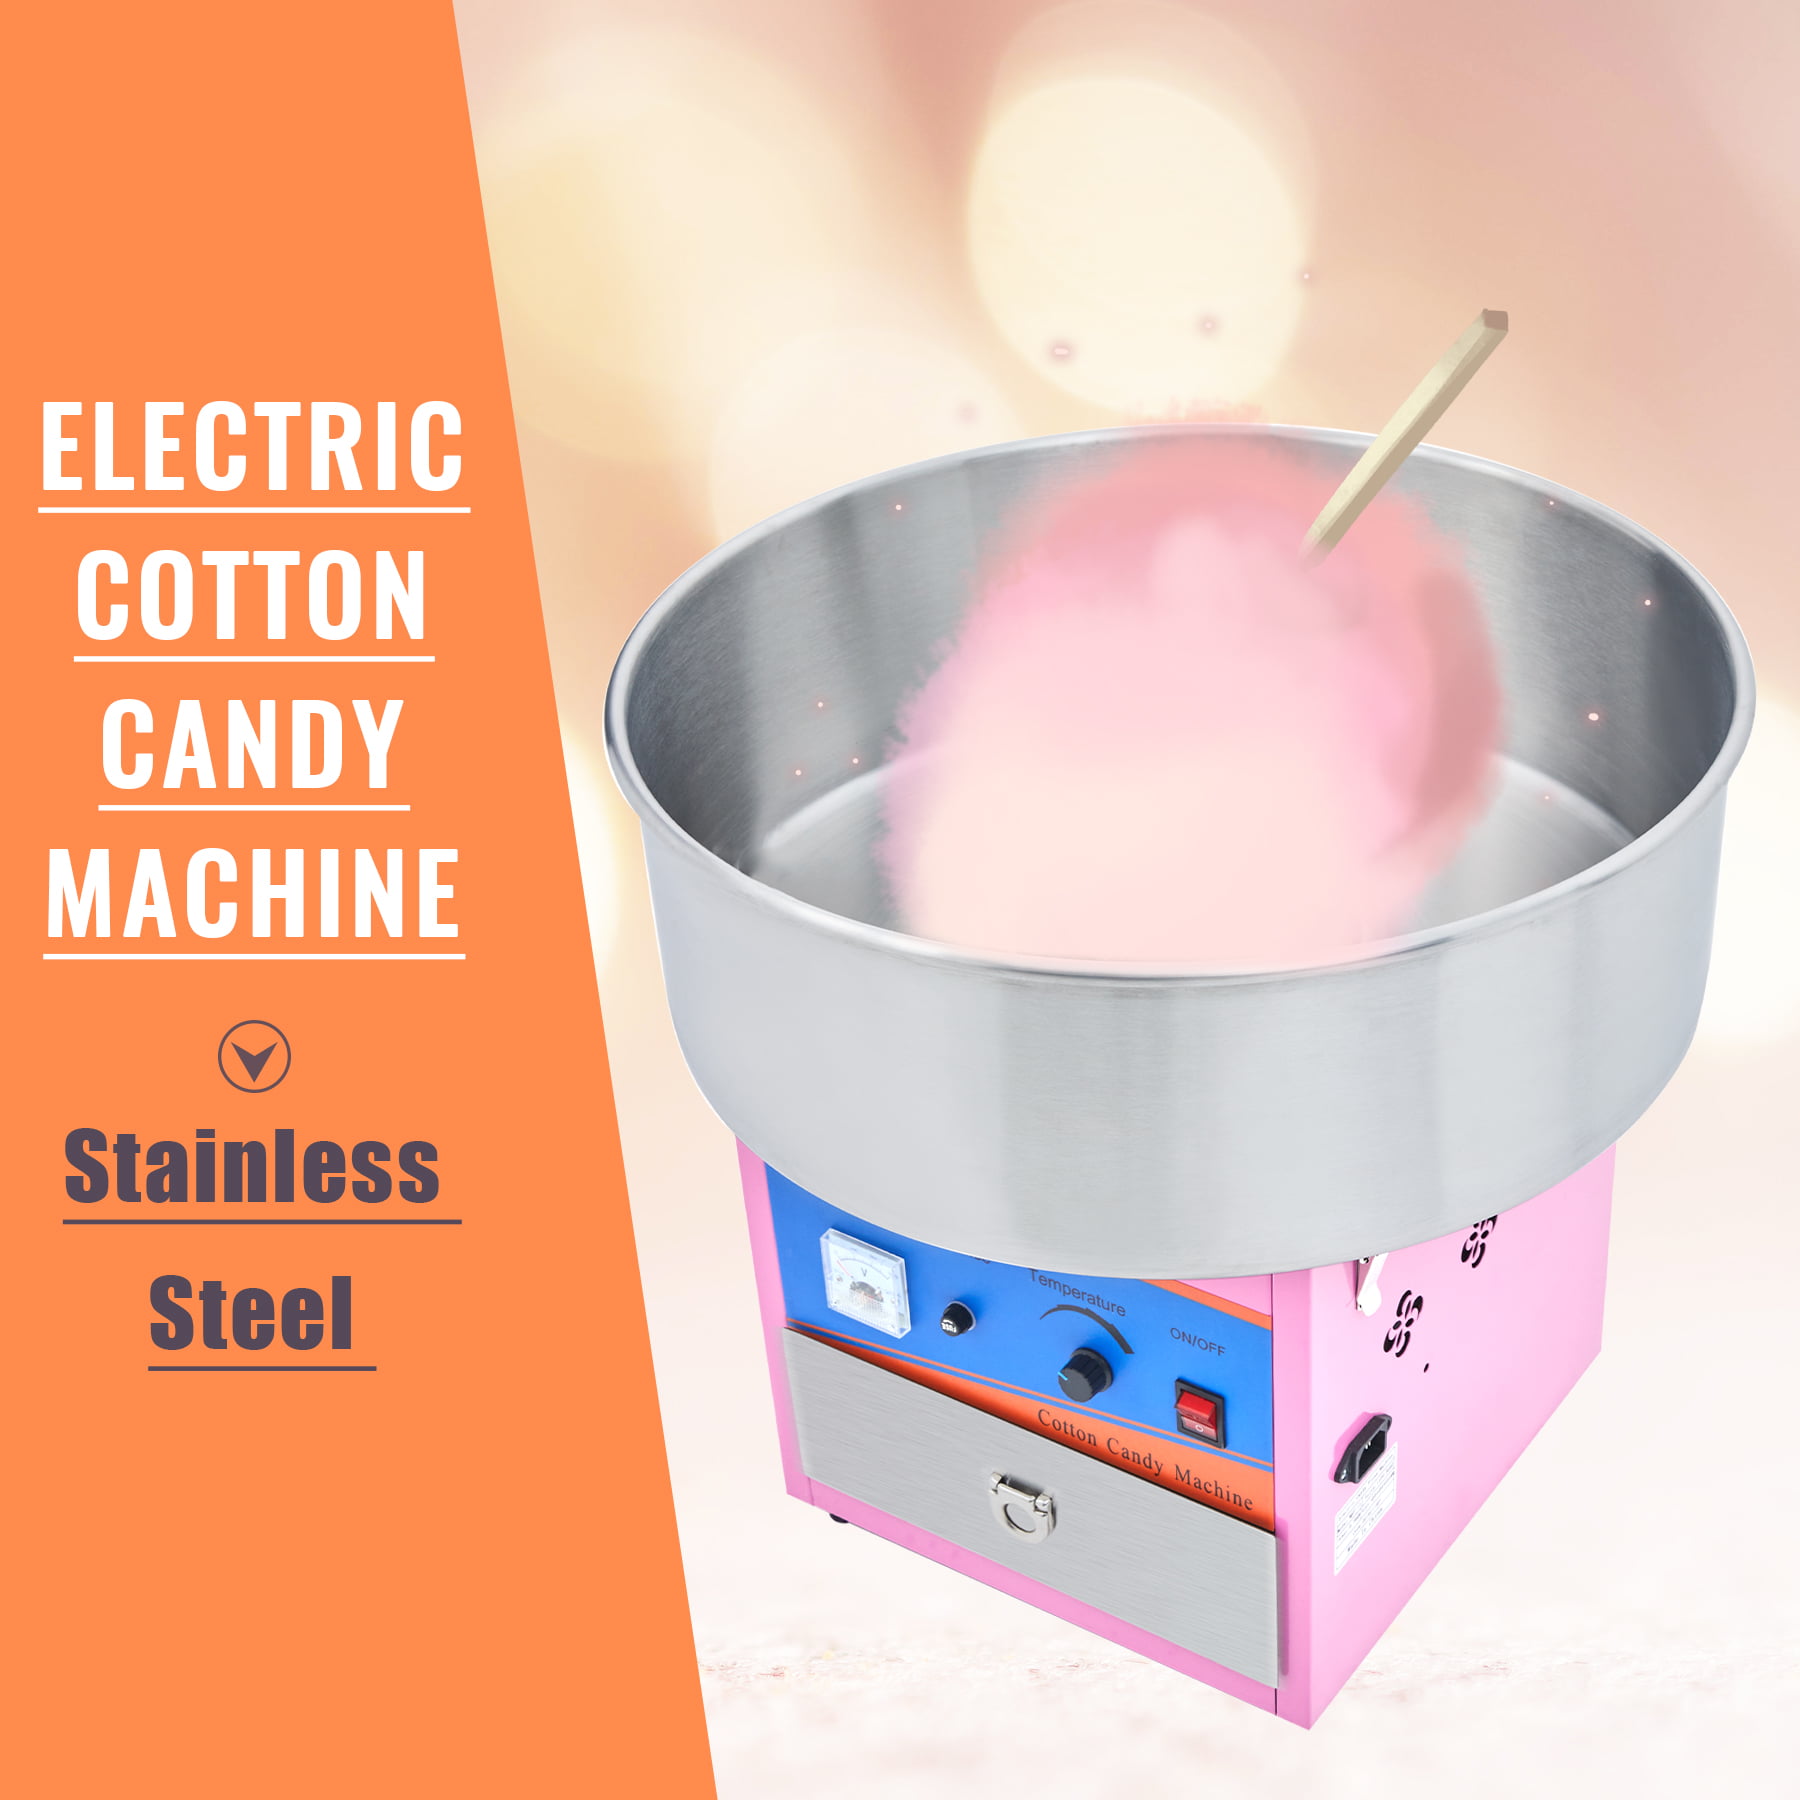 110V 1000W Electric Commercial Cotton Candy Floss Maker With Sugar Scoop Blue 20.5 Inch Large Cotton Candy Machine Staniless Steel Drawer & Anti-overheating Fuse For Kids Party Birthday Christmas 